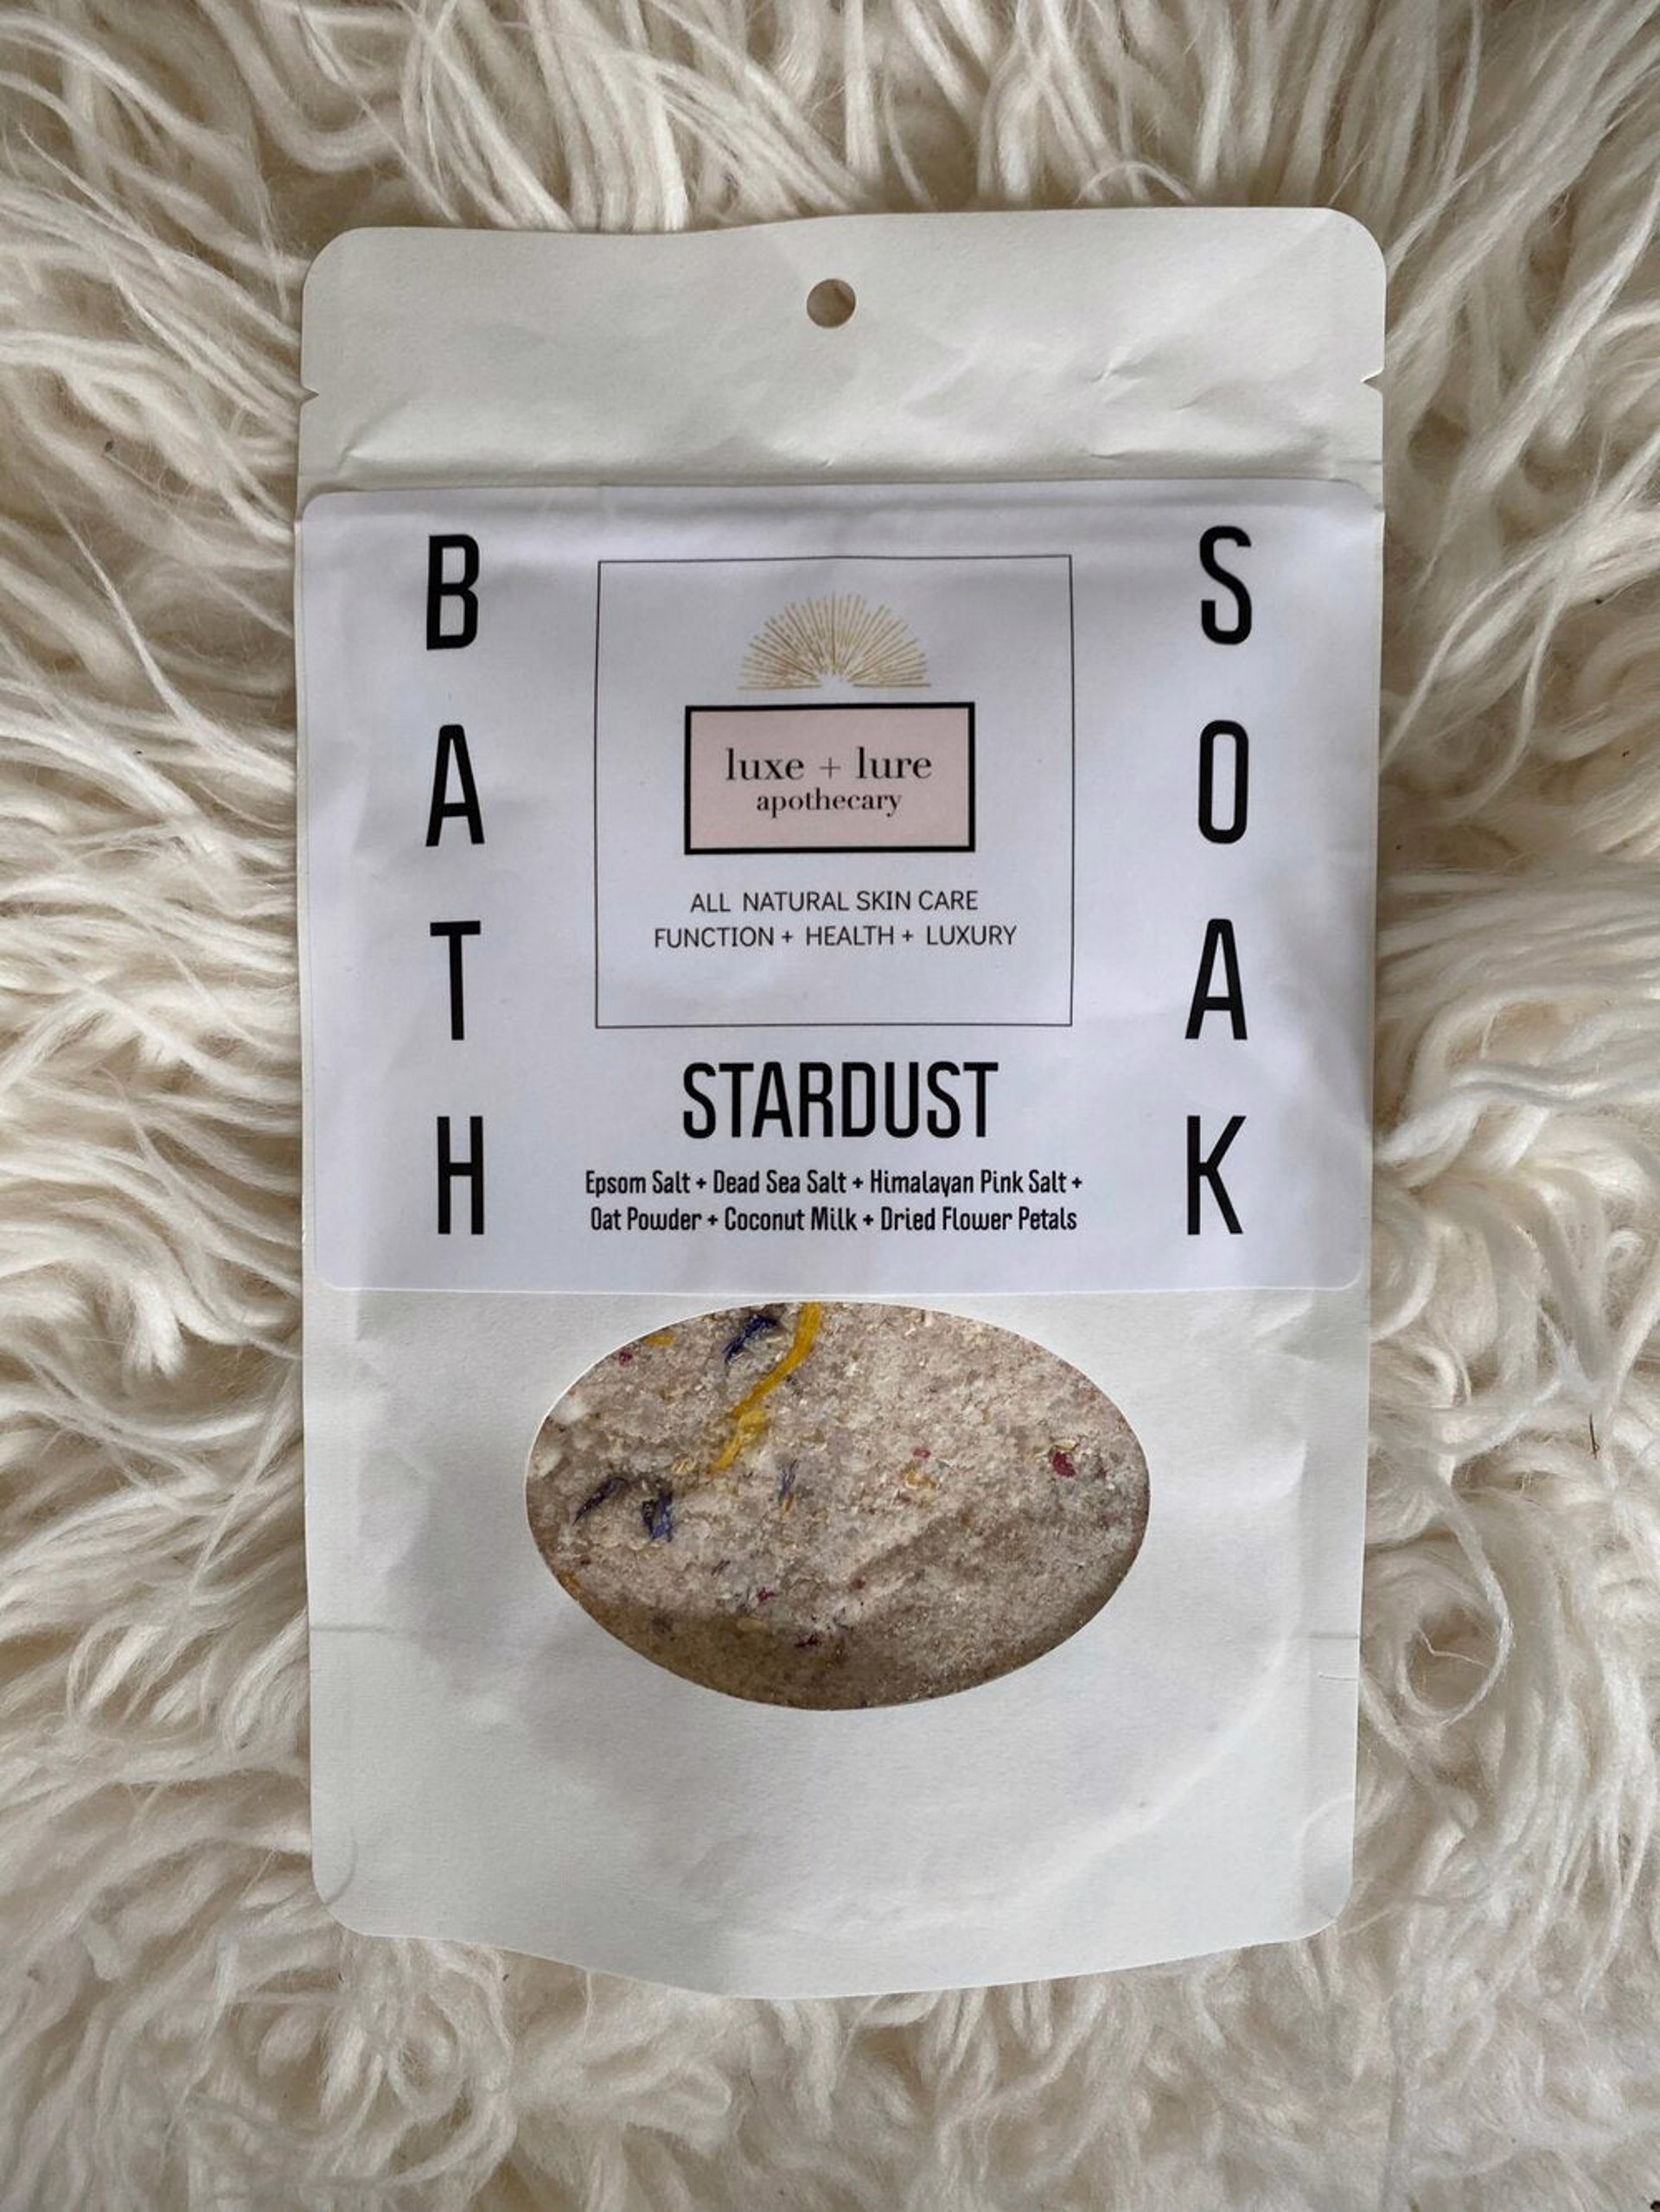 Star Dust Bath Soak by Luxe + Lure Apothecary